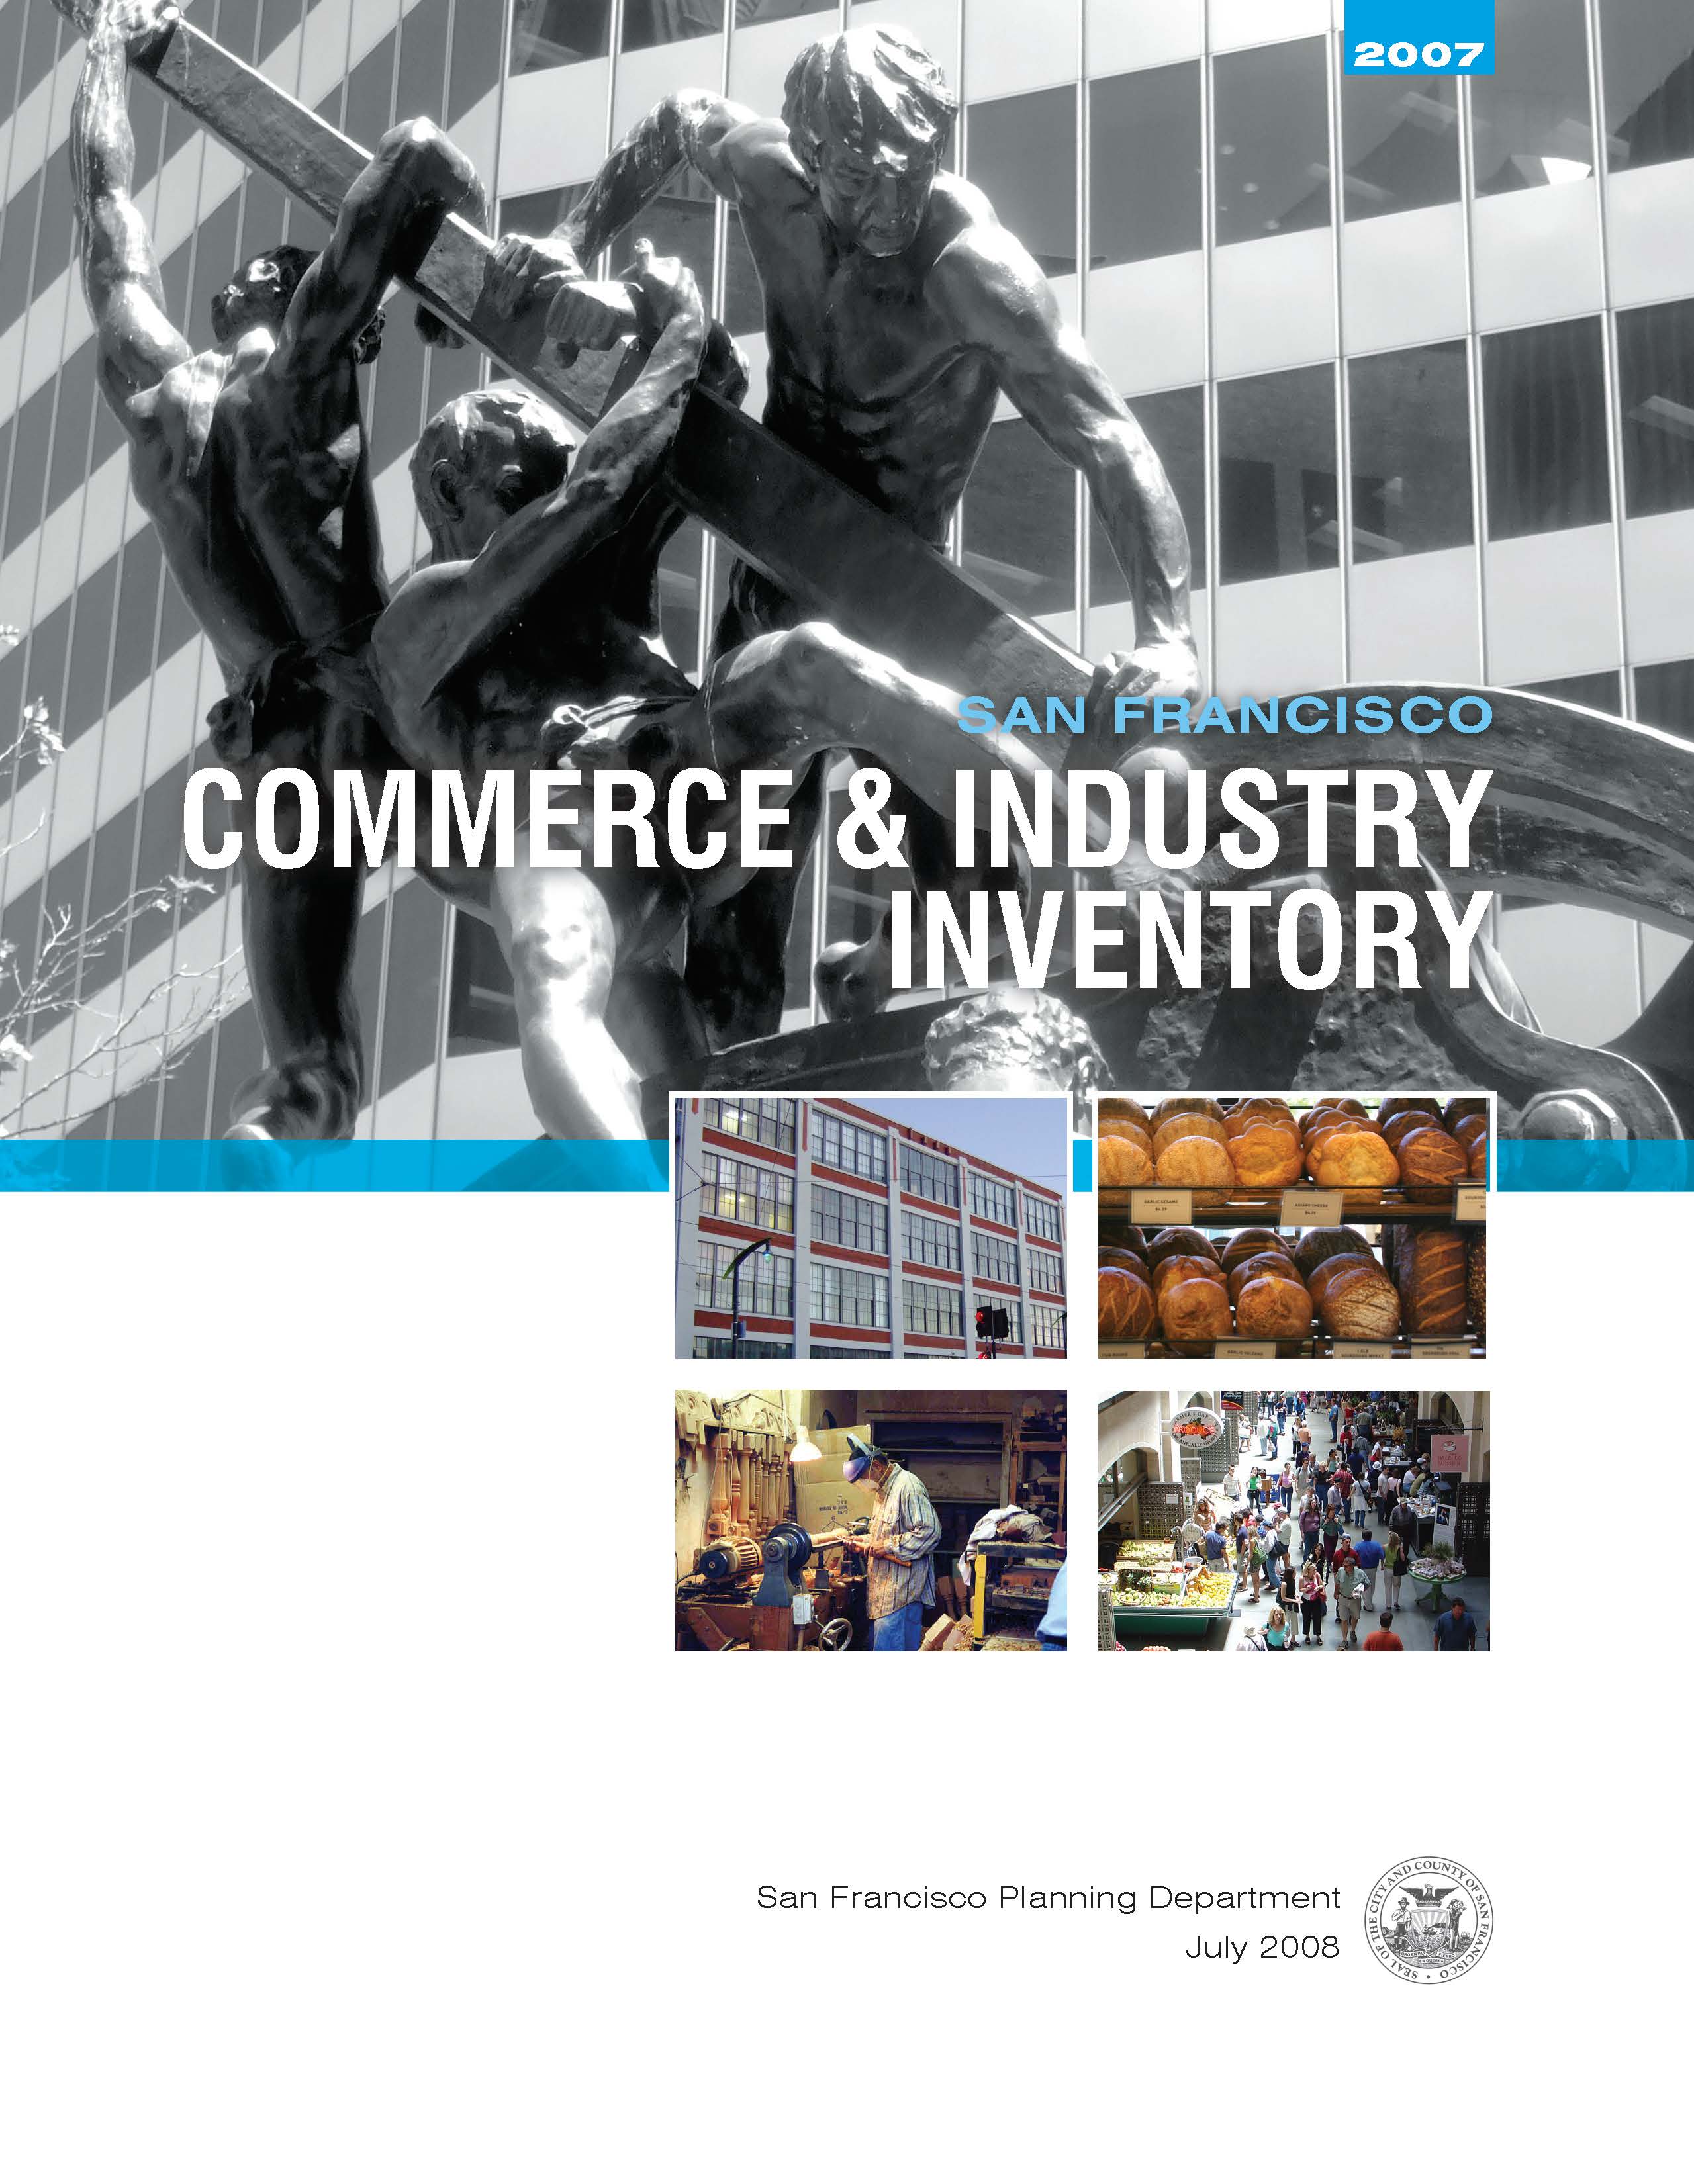 Cover Image for the Commerce & Industry Inventory Report 2007